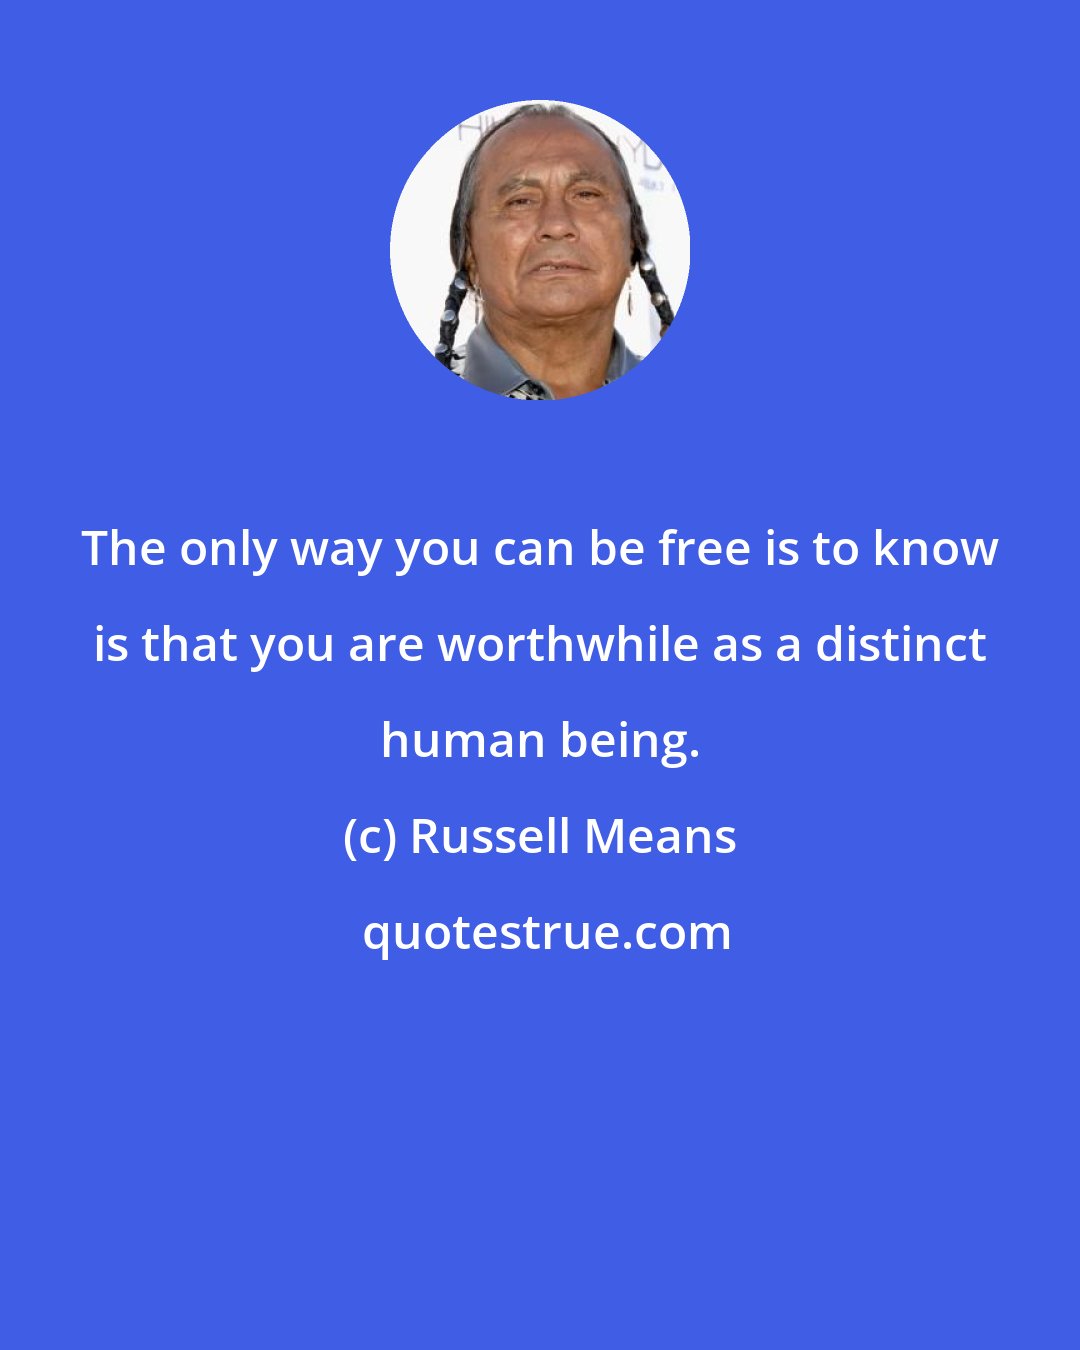 Russell Means: The only way you can be free is to know is that you are worthwhile as a distinct human being.